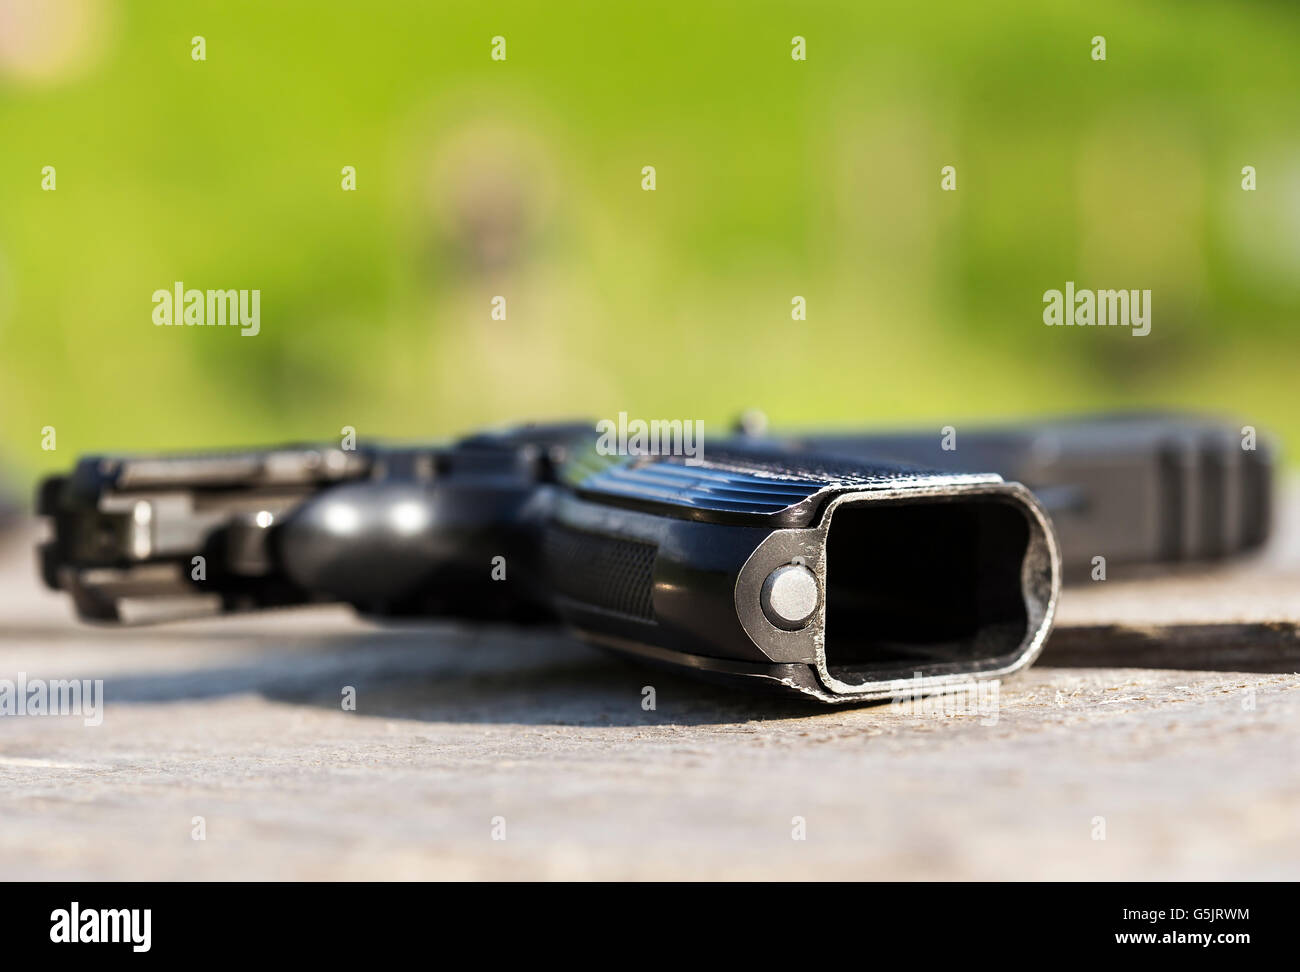 Gun without a clip with a blurred background. Stock Photo